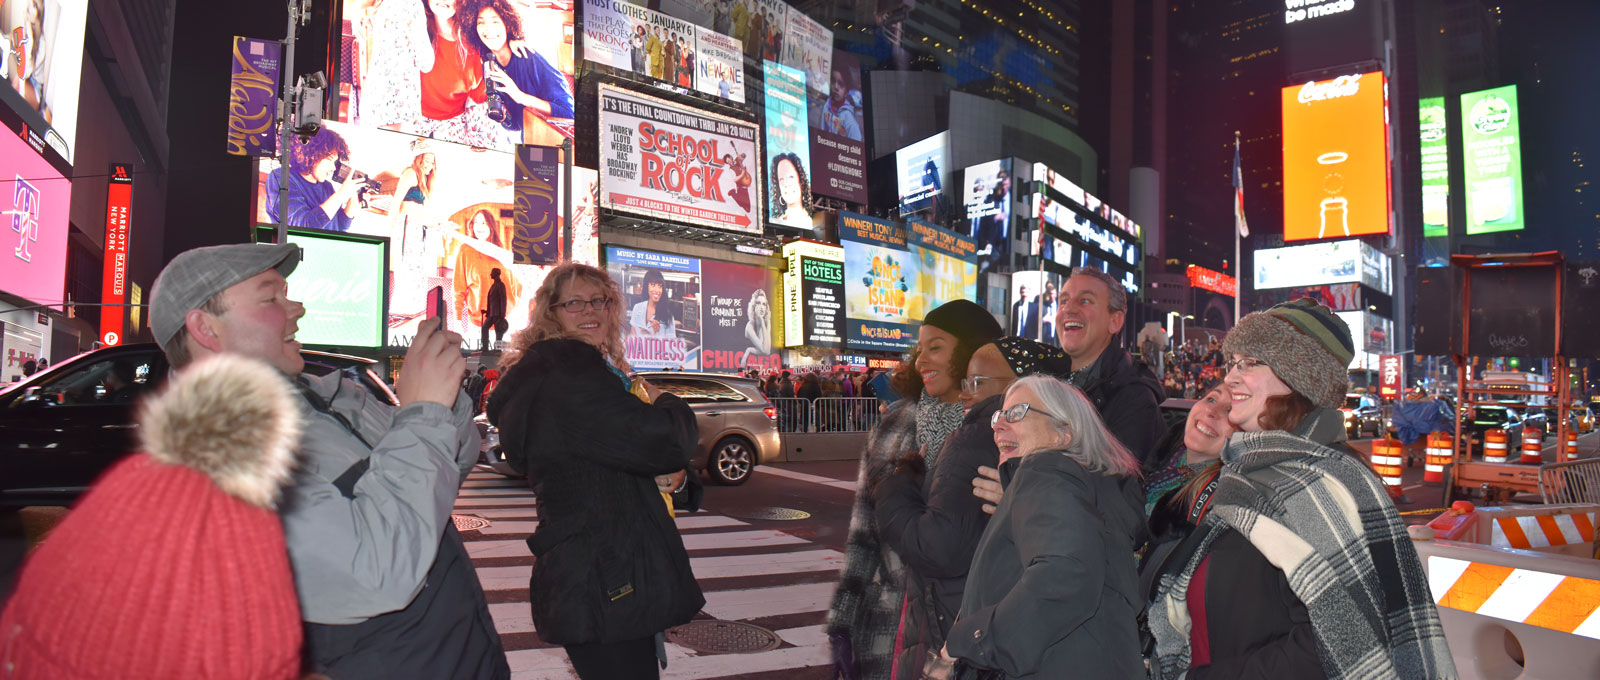 Haydn photographing the group in Times Square...